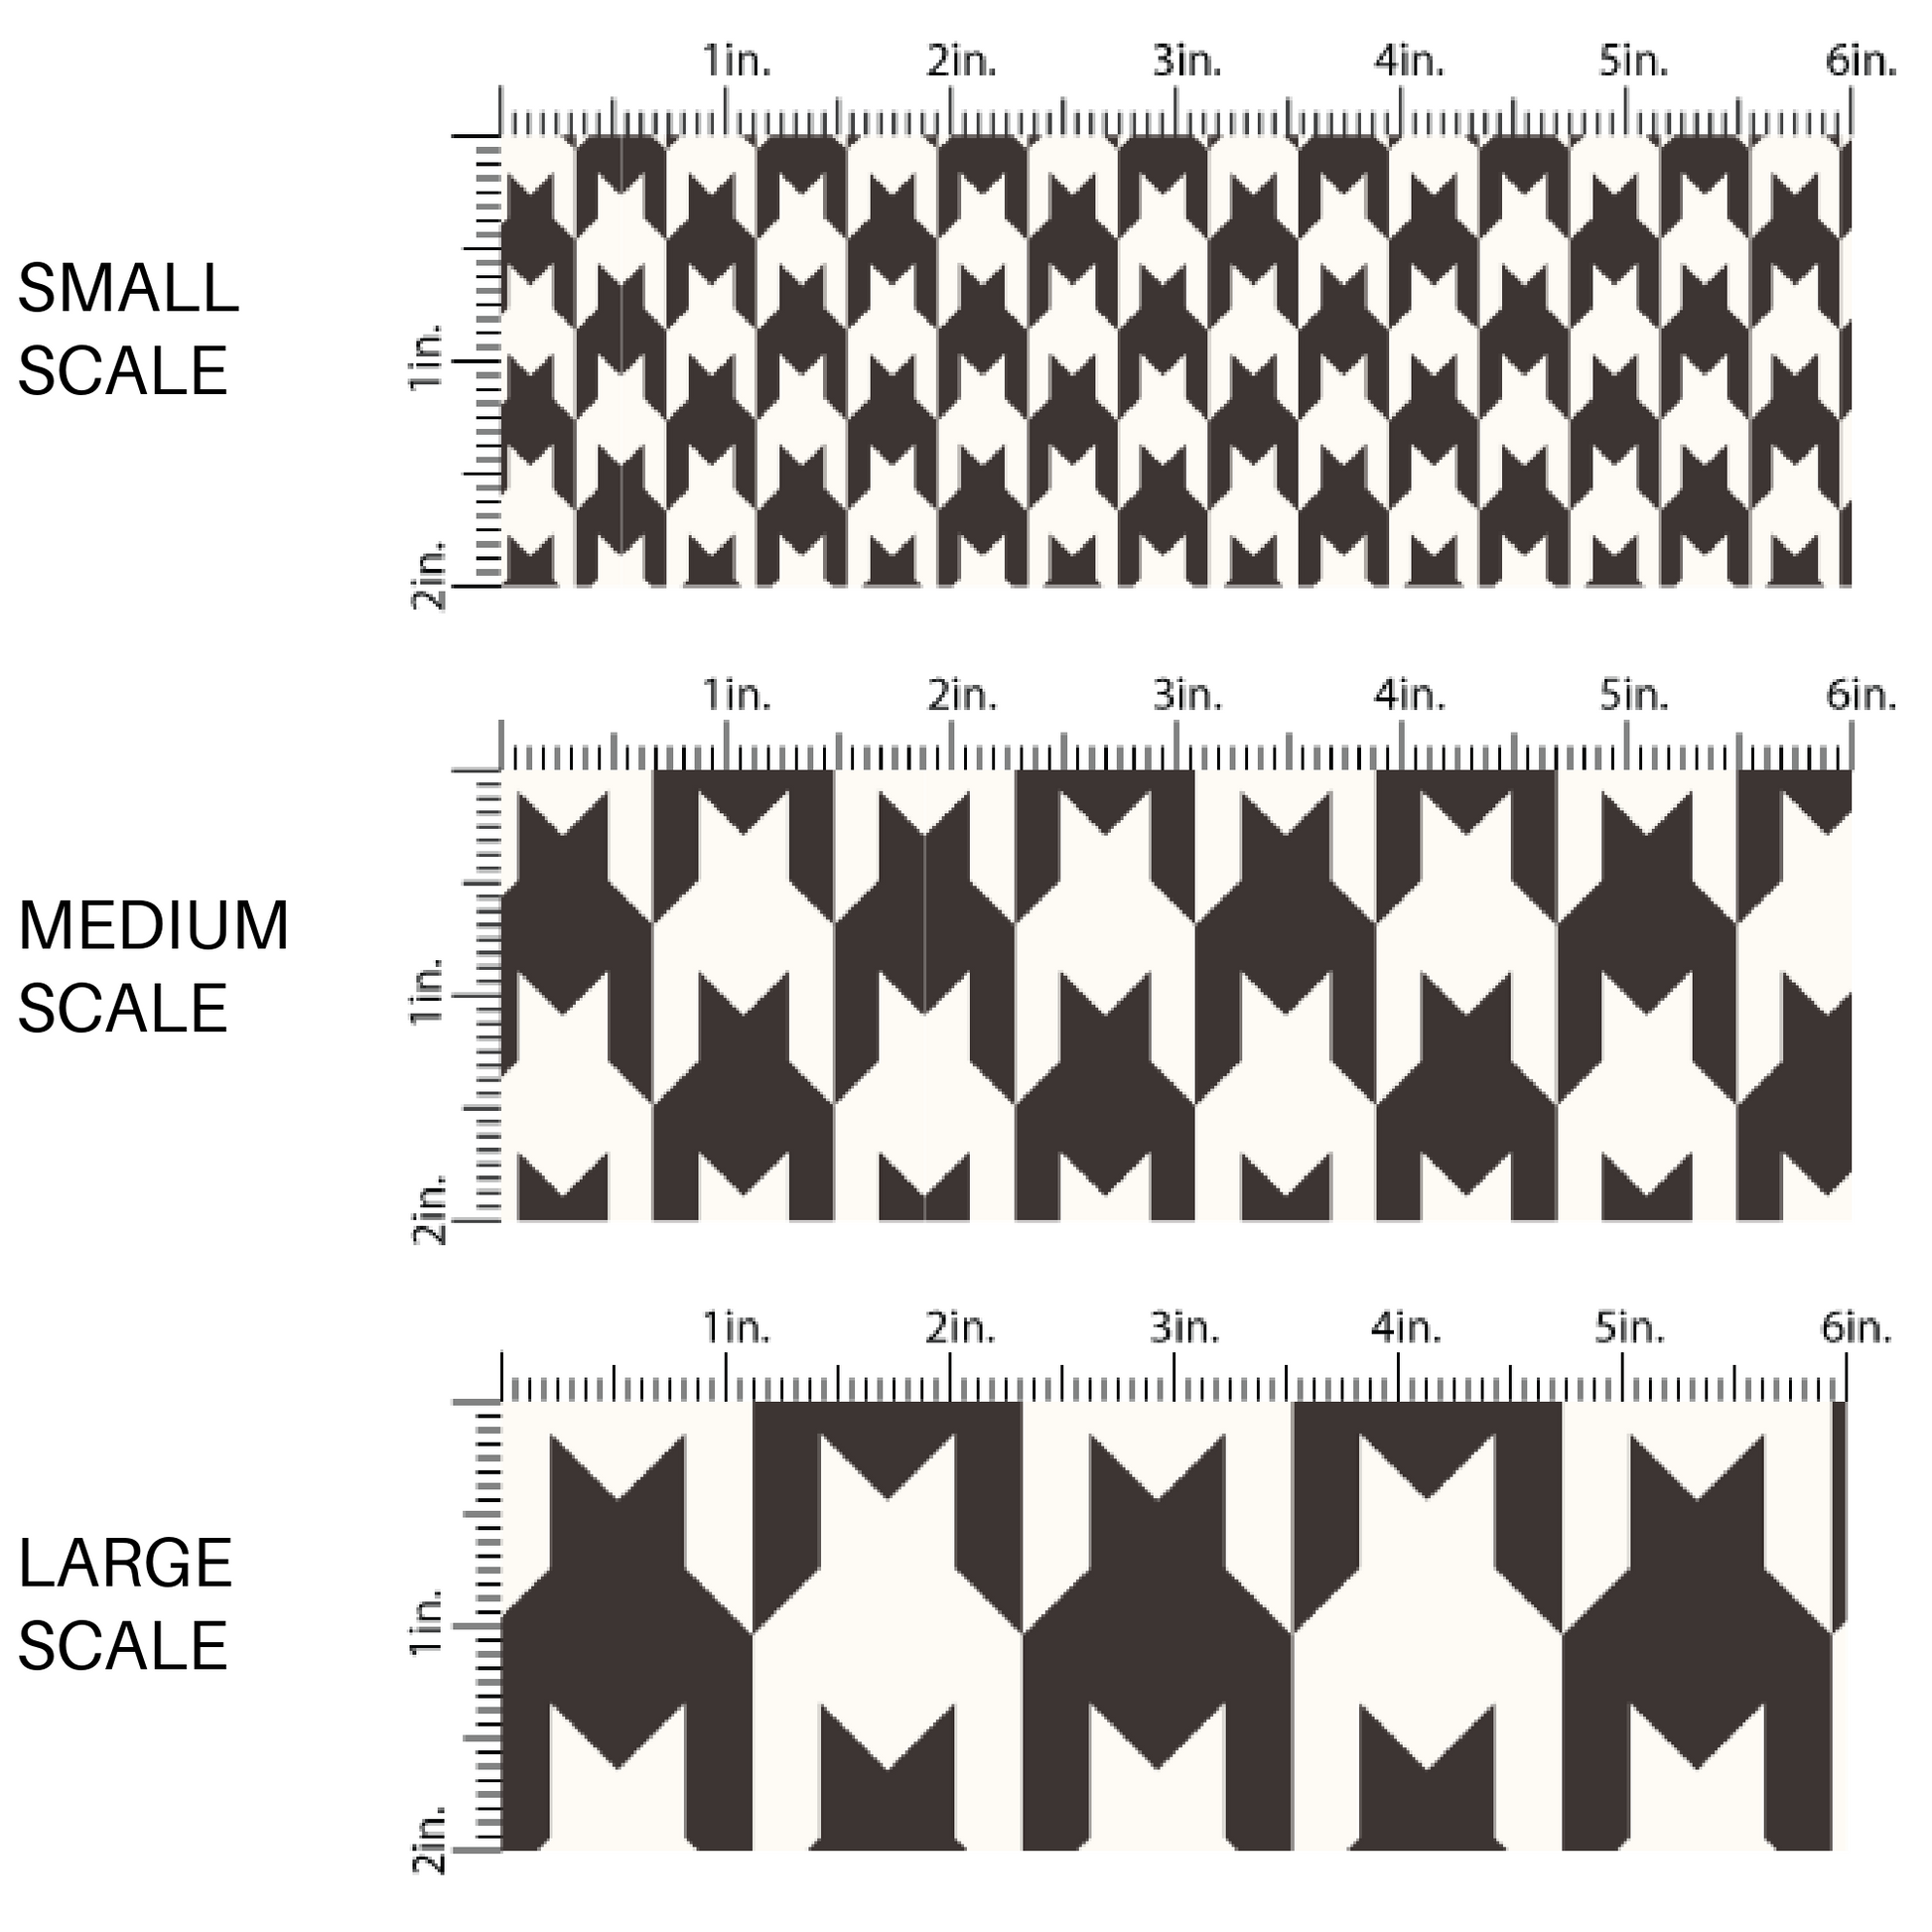 Black and White Hound's-tooth Fabric by the Yard scaled image guide.